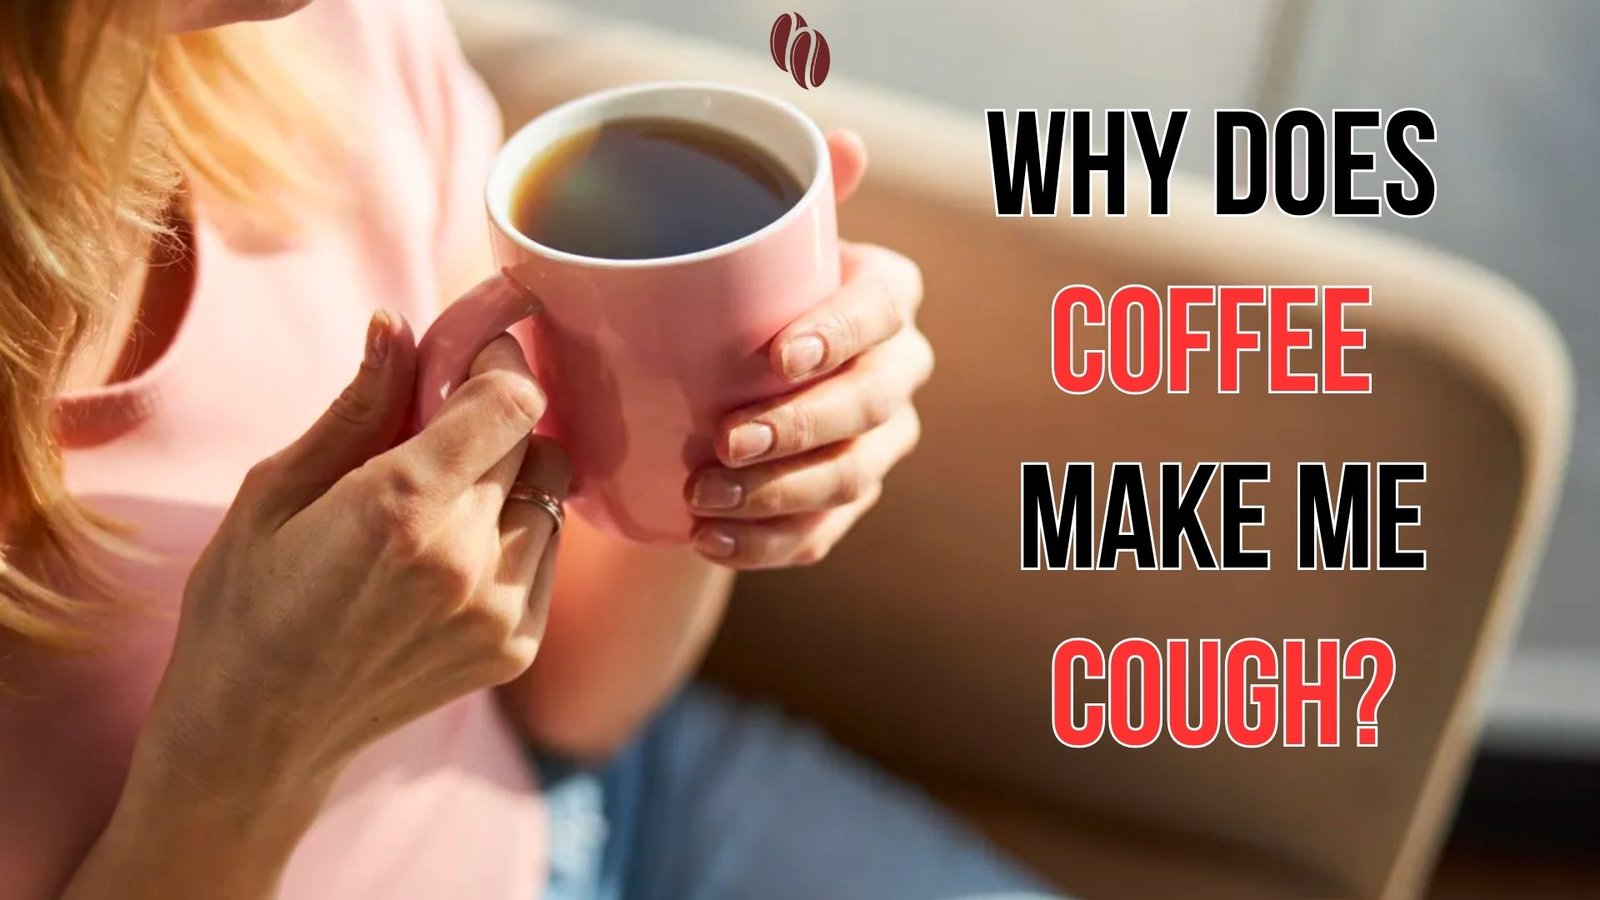 Why does coffee make me cough?